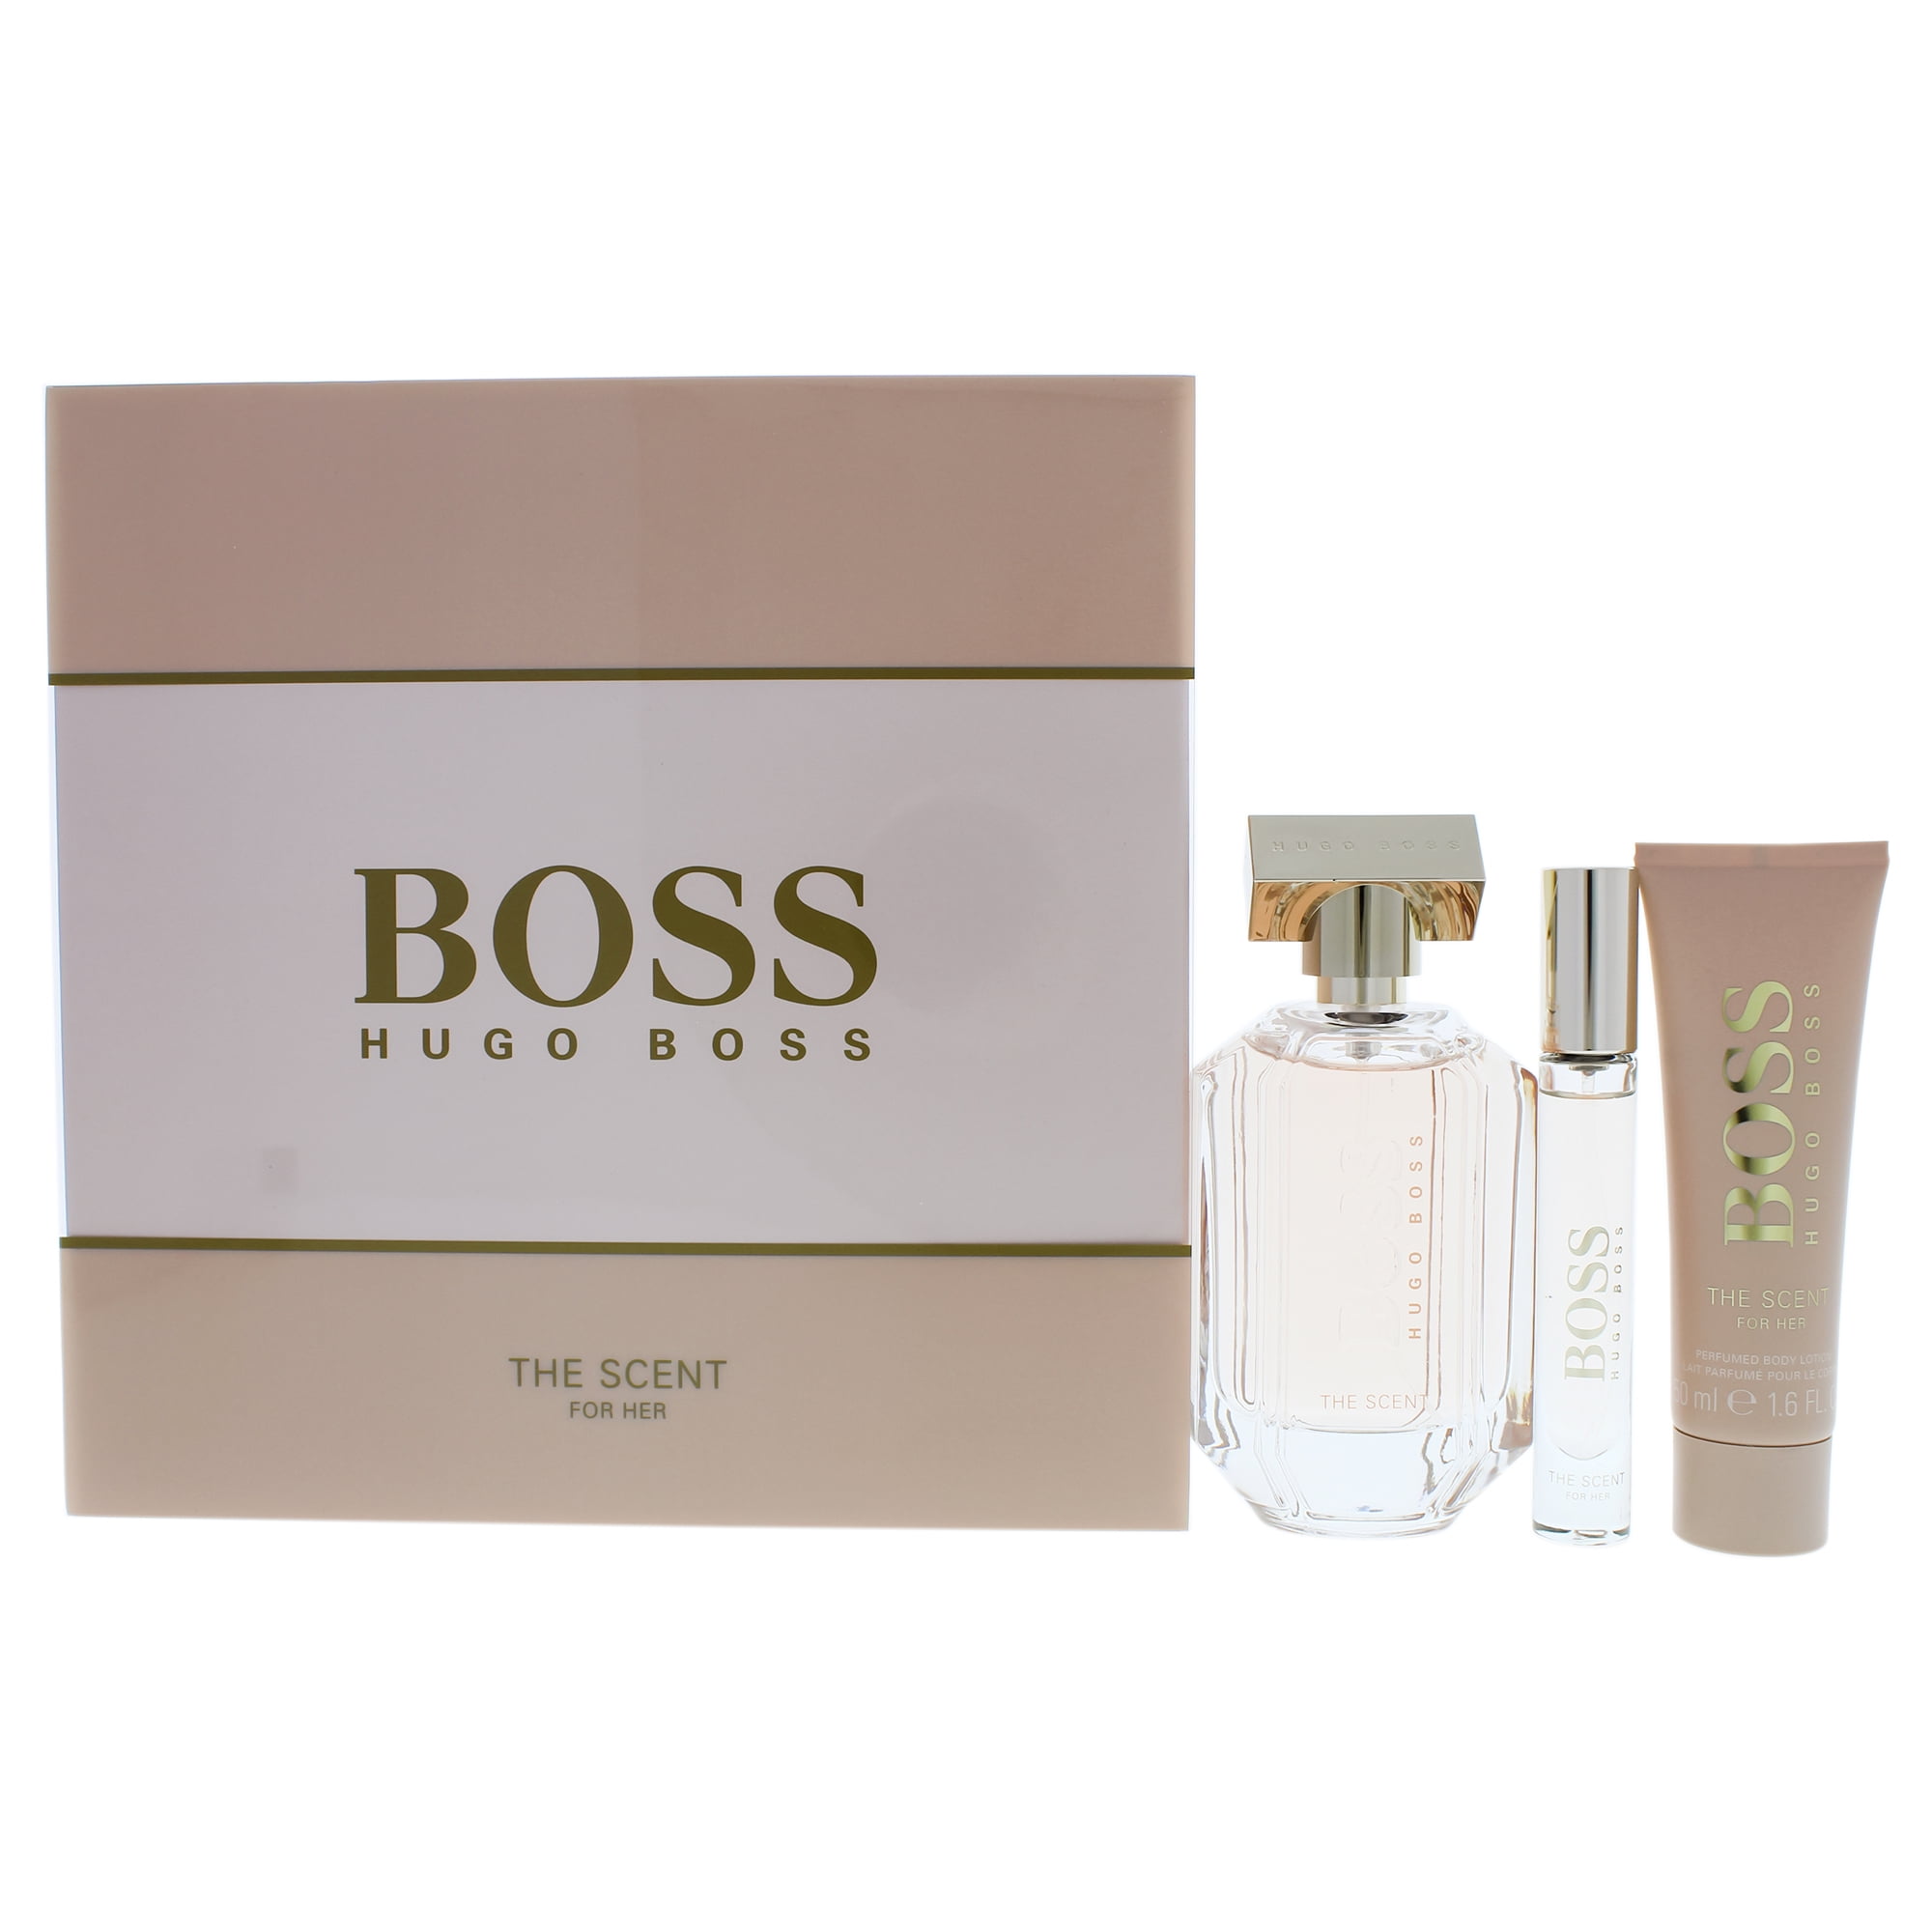 hugo boss the scent set for her